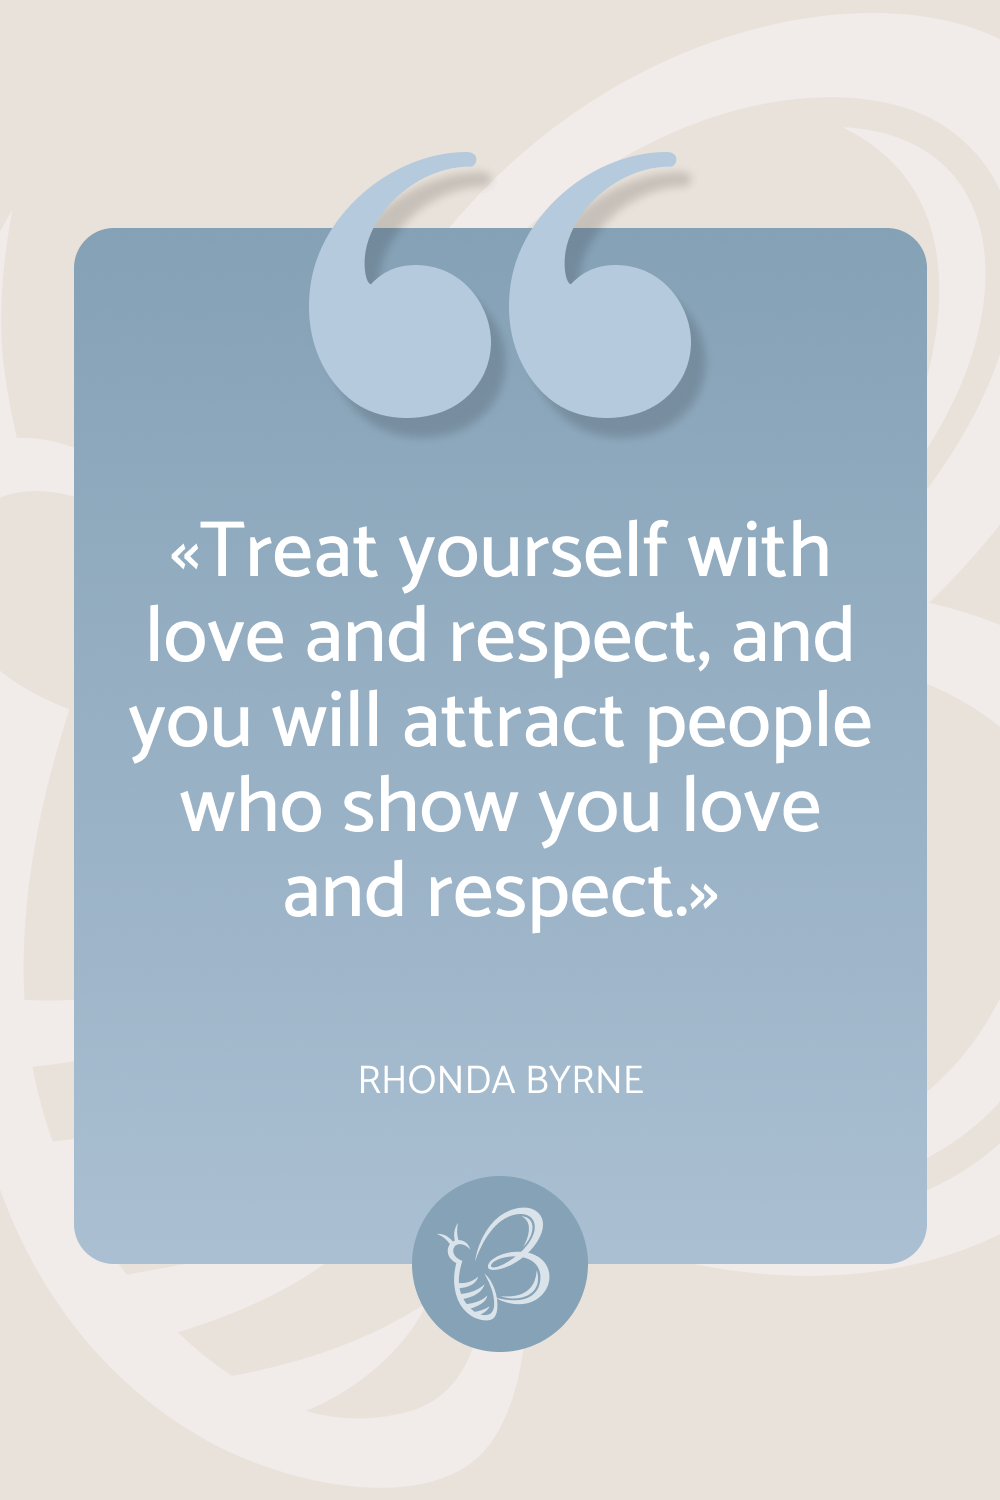 Treat yourself with love and respect, and you will attract people who show you love and respect